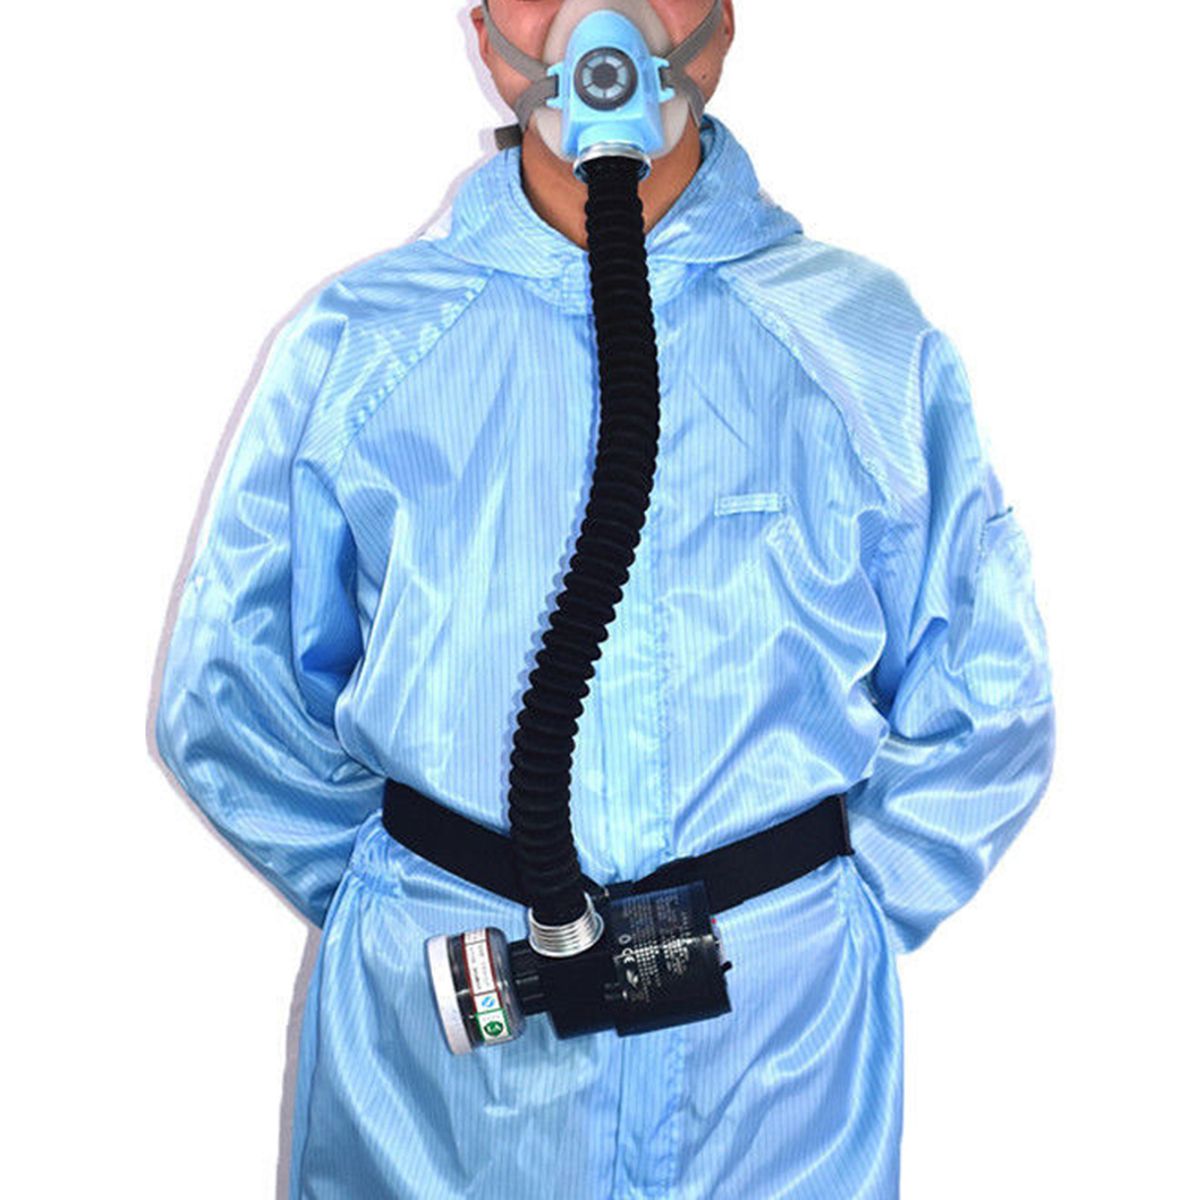 Electric-Constant-Flow-Supplied-Air-Fed-Face-Gas-Mask-Spray-Painting-Tool-Respirator-System-1326069